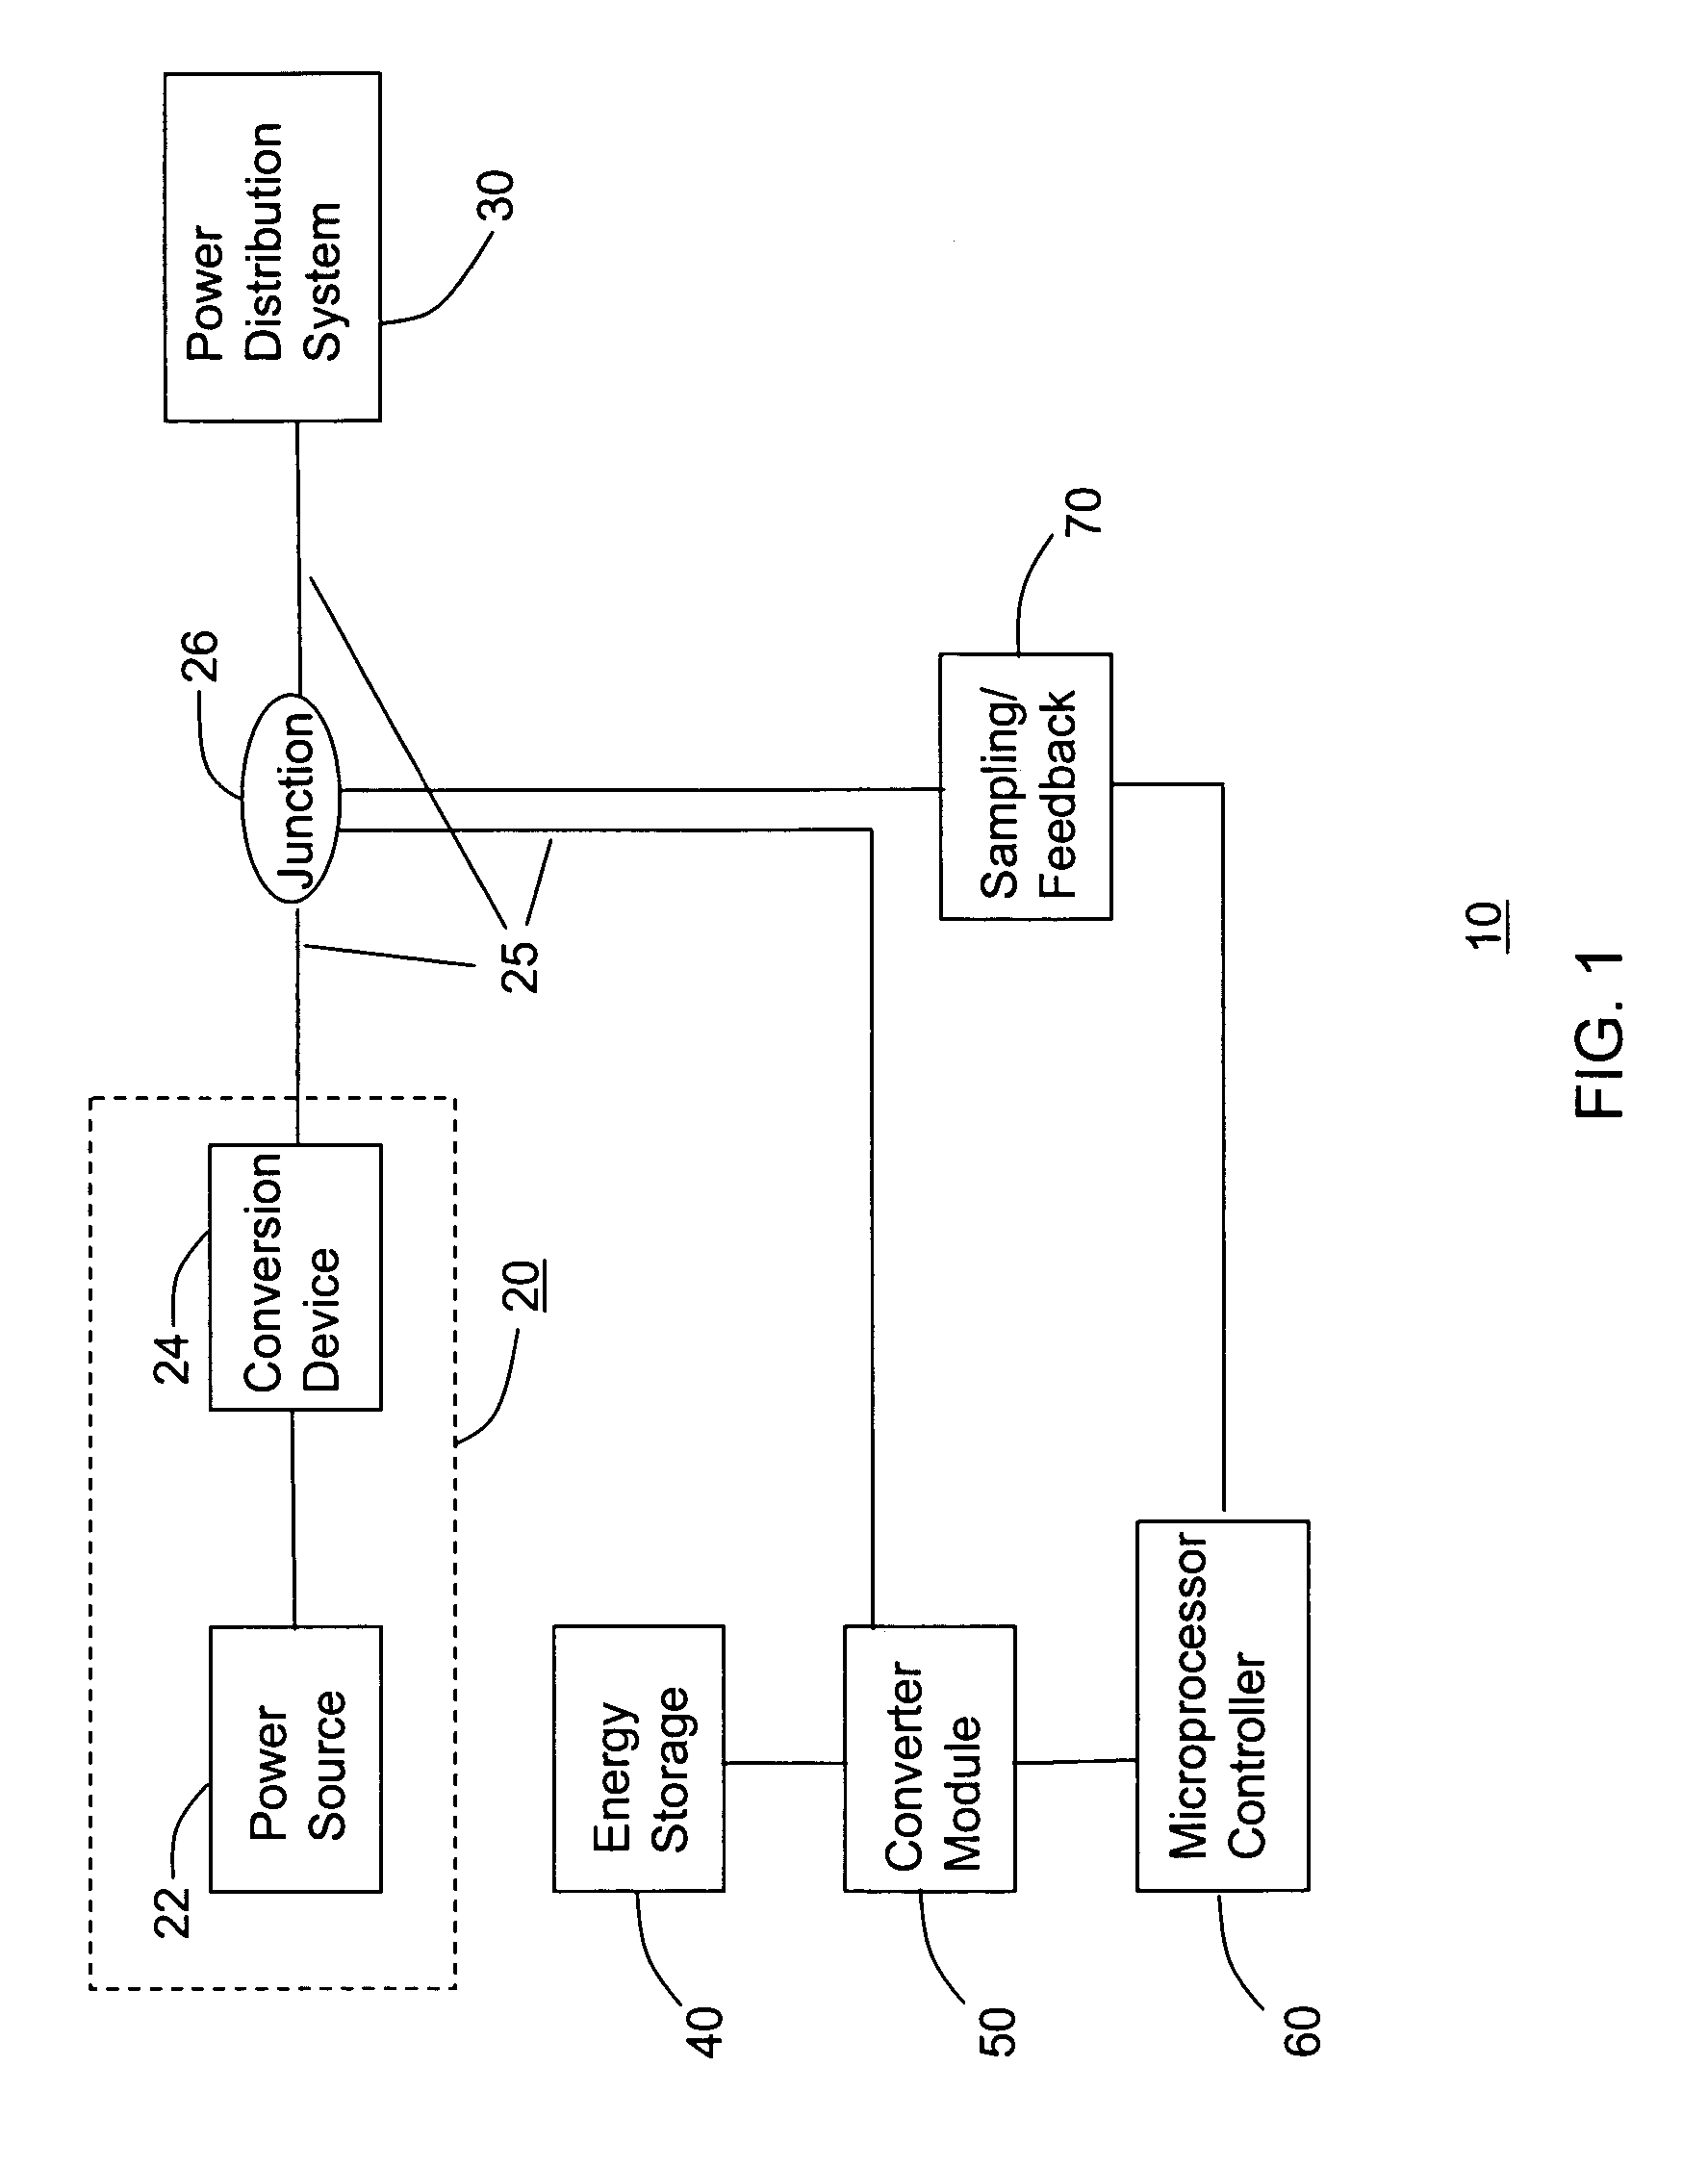 Enhanced distributed energy resource system